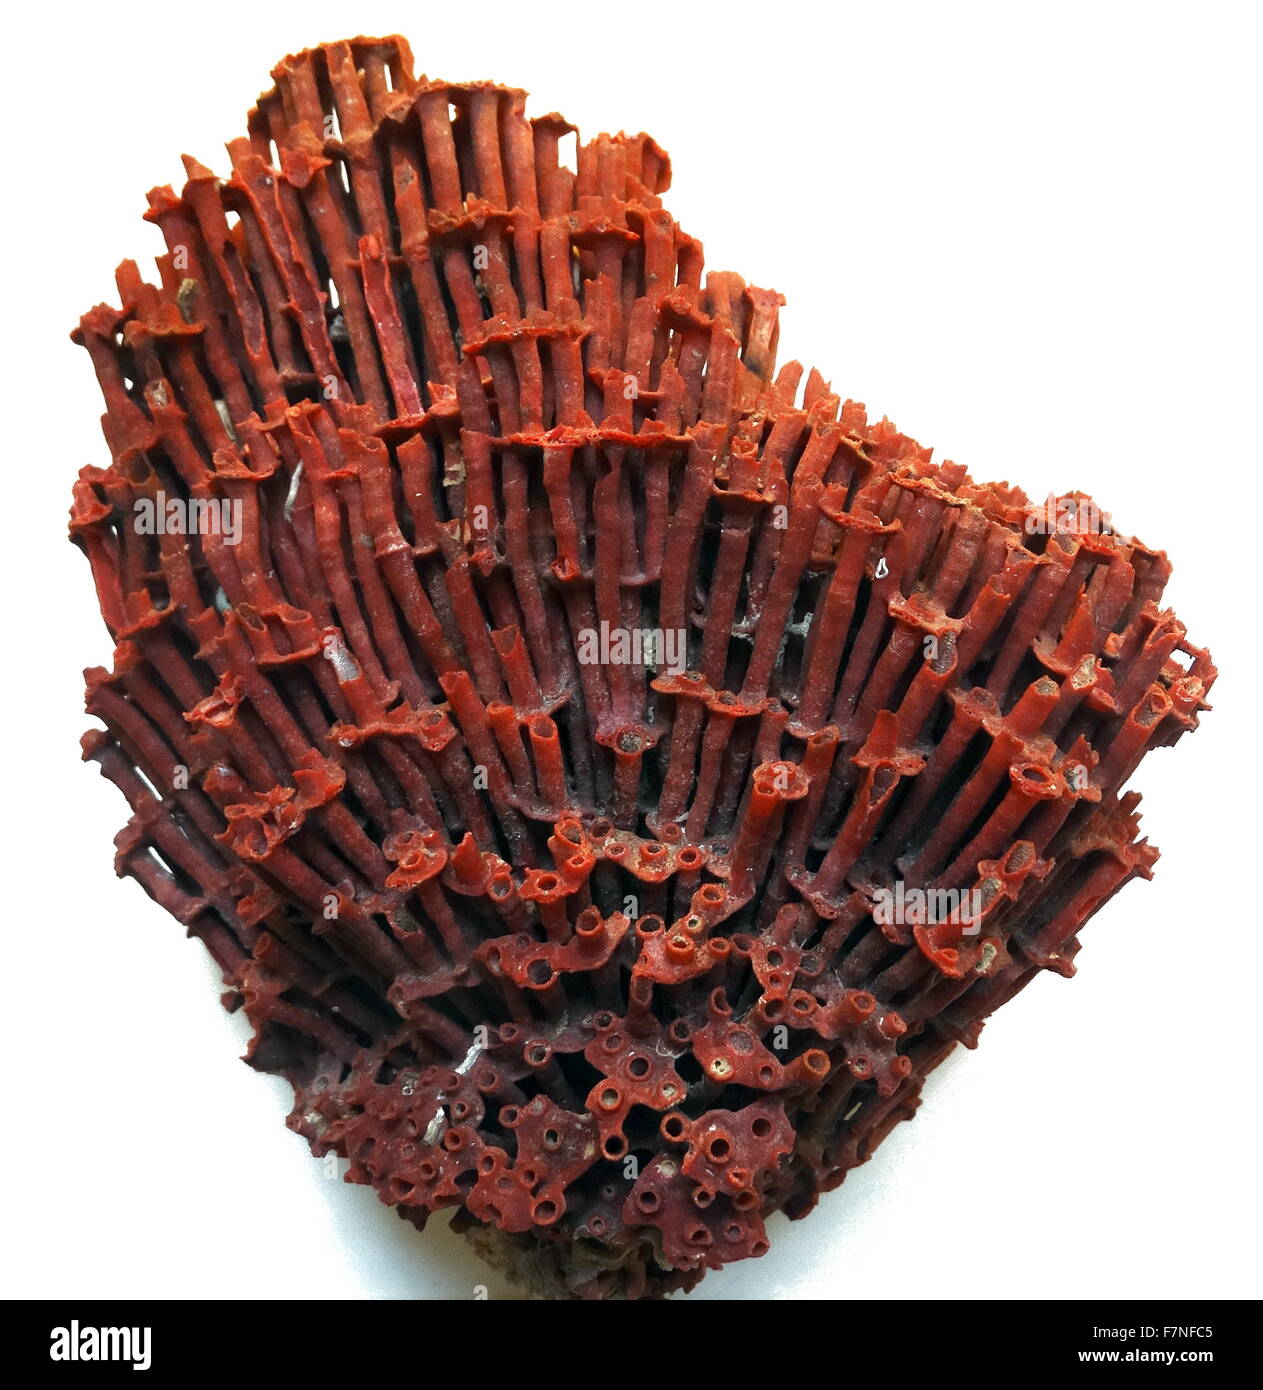 Tubipora Musica (organ pipe coral), native to the waters in the Indian Ocean and central regions of the Pacific Ocean. Only species of soft coral. Indonesia. Dated 1759 Stock Photo